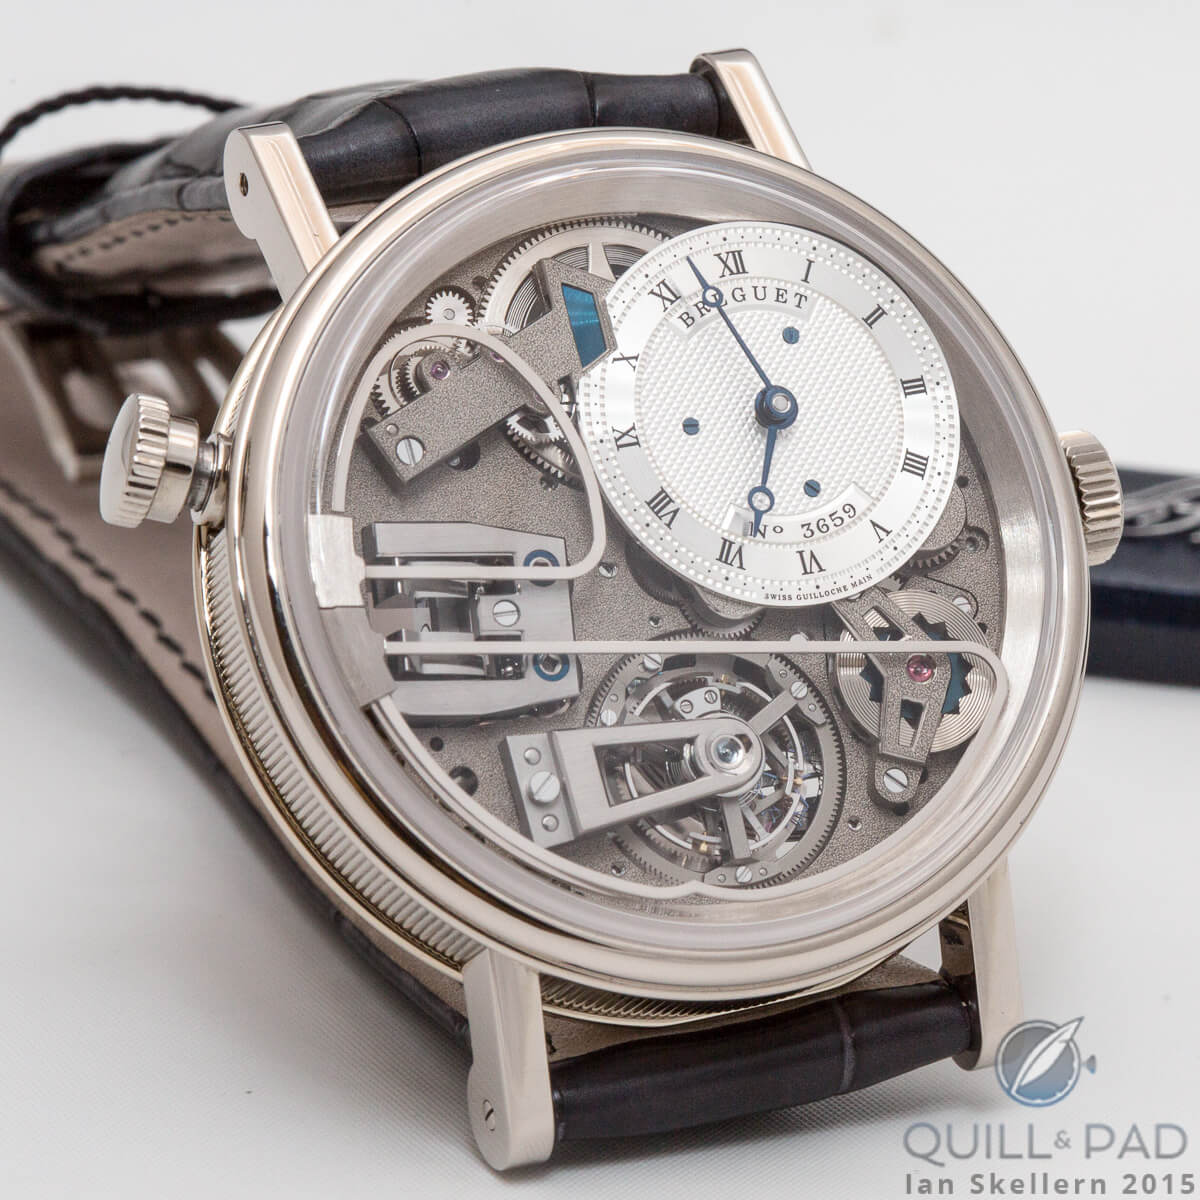 Breguet Reference 7087 Tradition Répétition Minutes Tourbillon: those unusually curved bars dial side are the repeater gongs